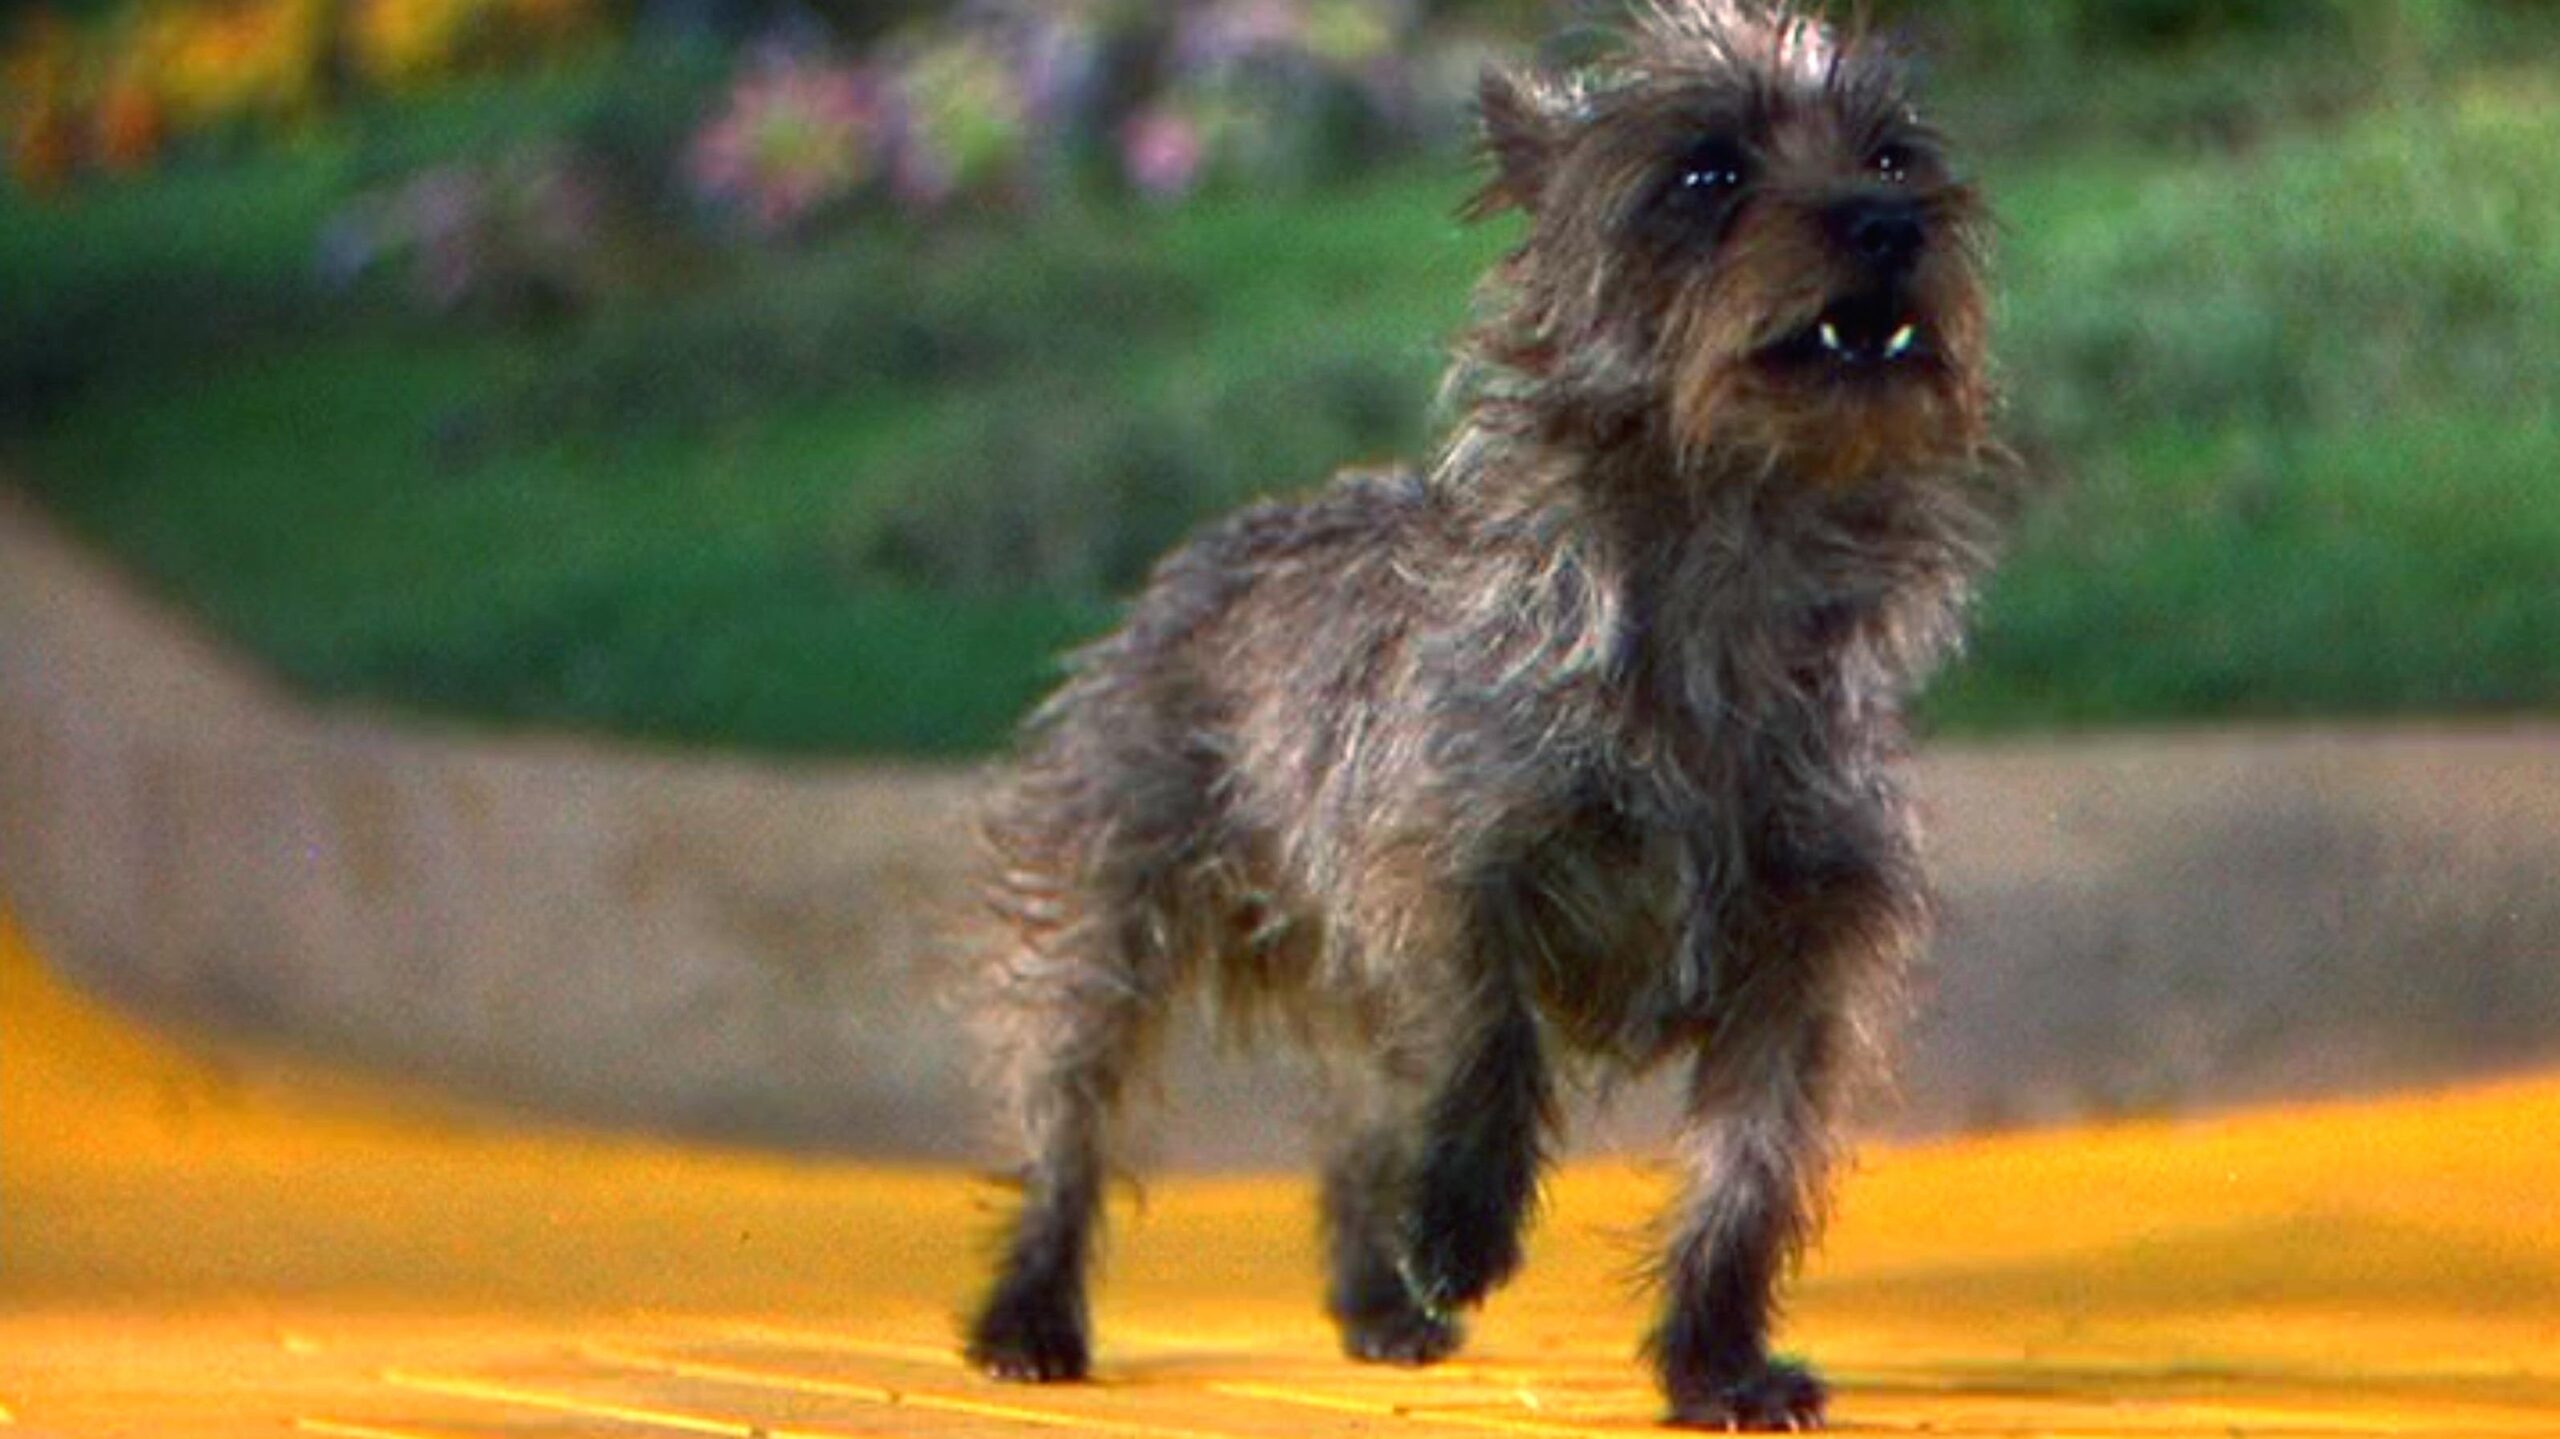 Why was Dorothy's dog named Toto?